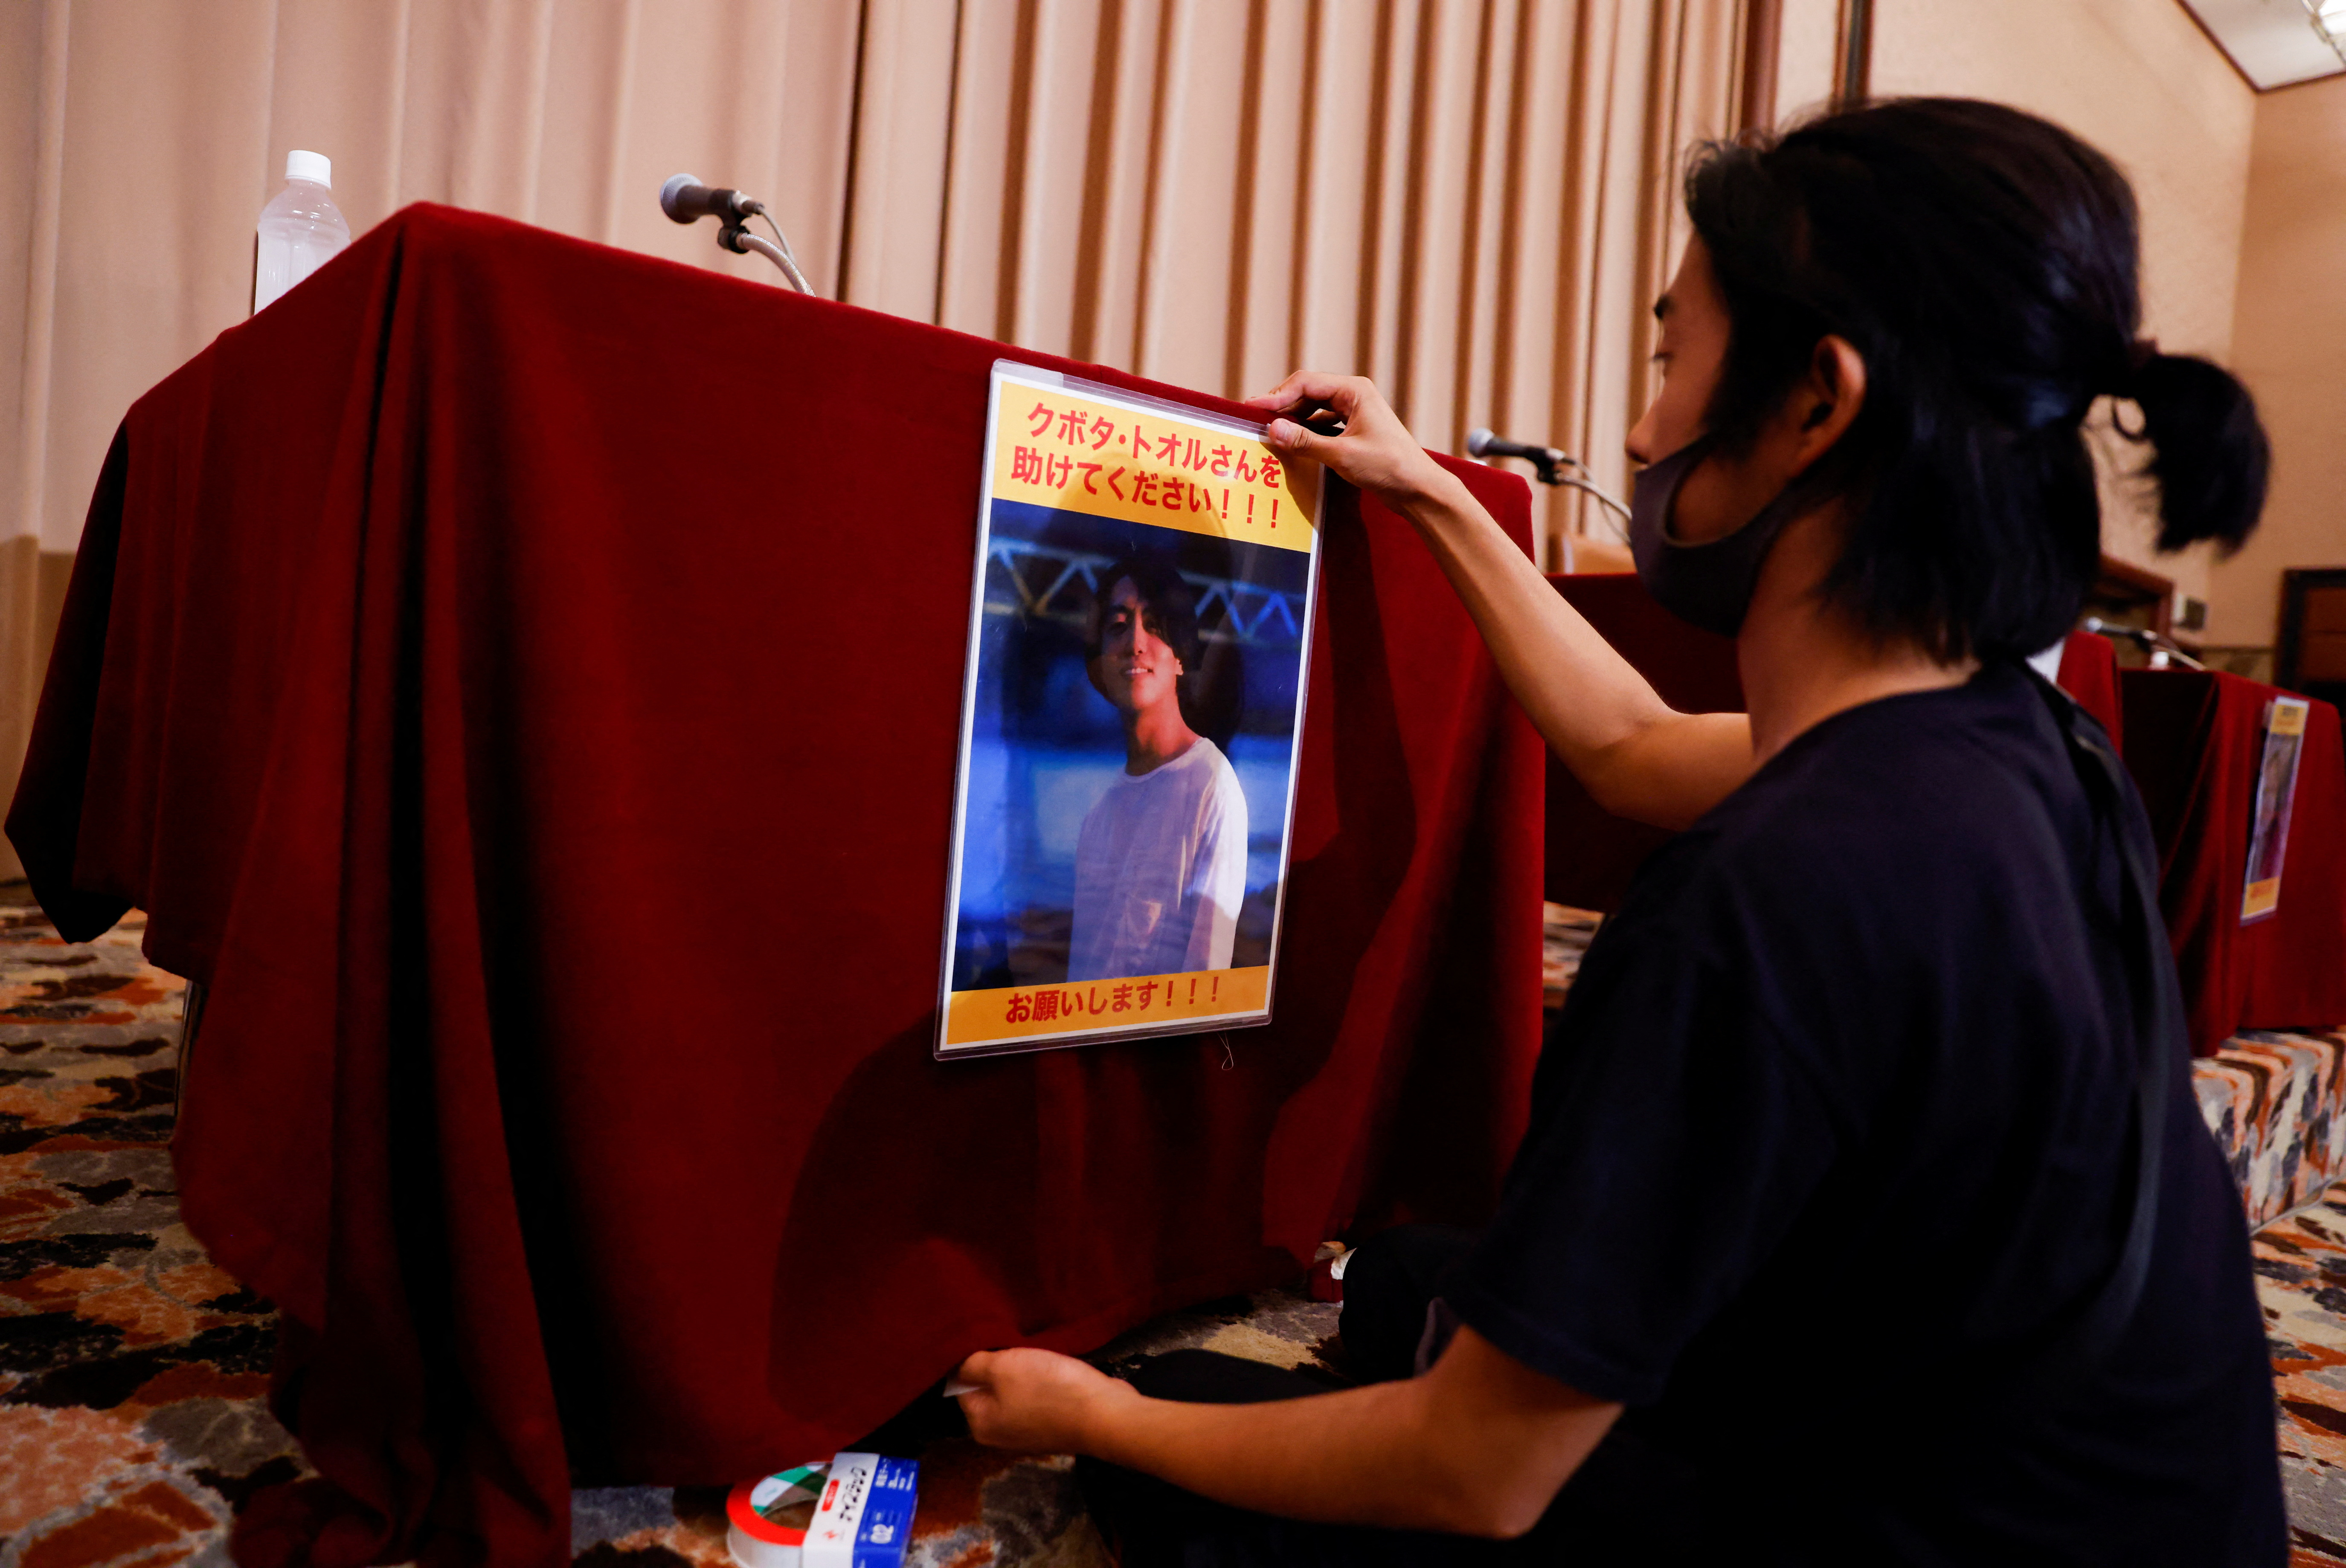 A portrait photo of Japanese documentary filmmaker Toru Kubota, who has been detained in Myanmar, is displayed during a news conference in Tokyo